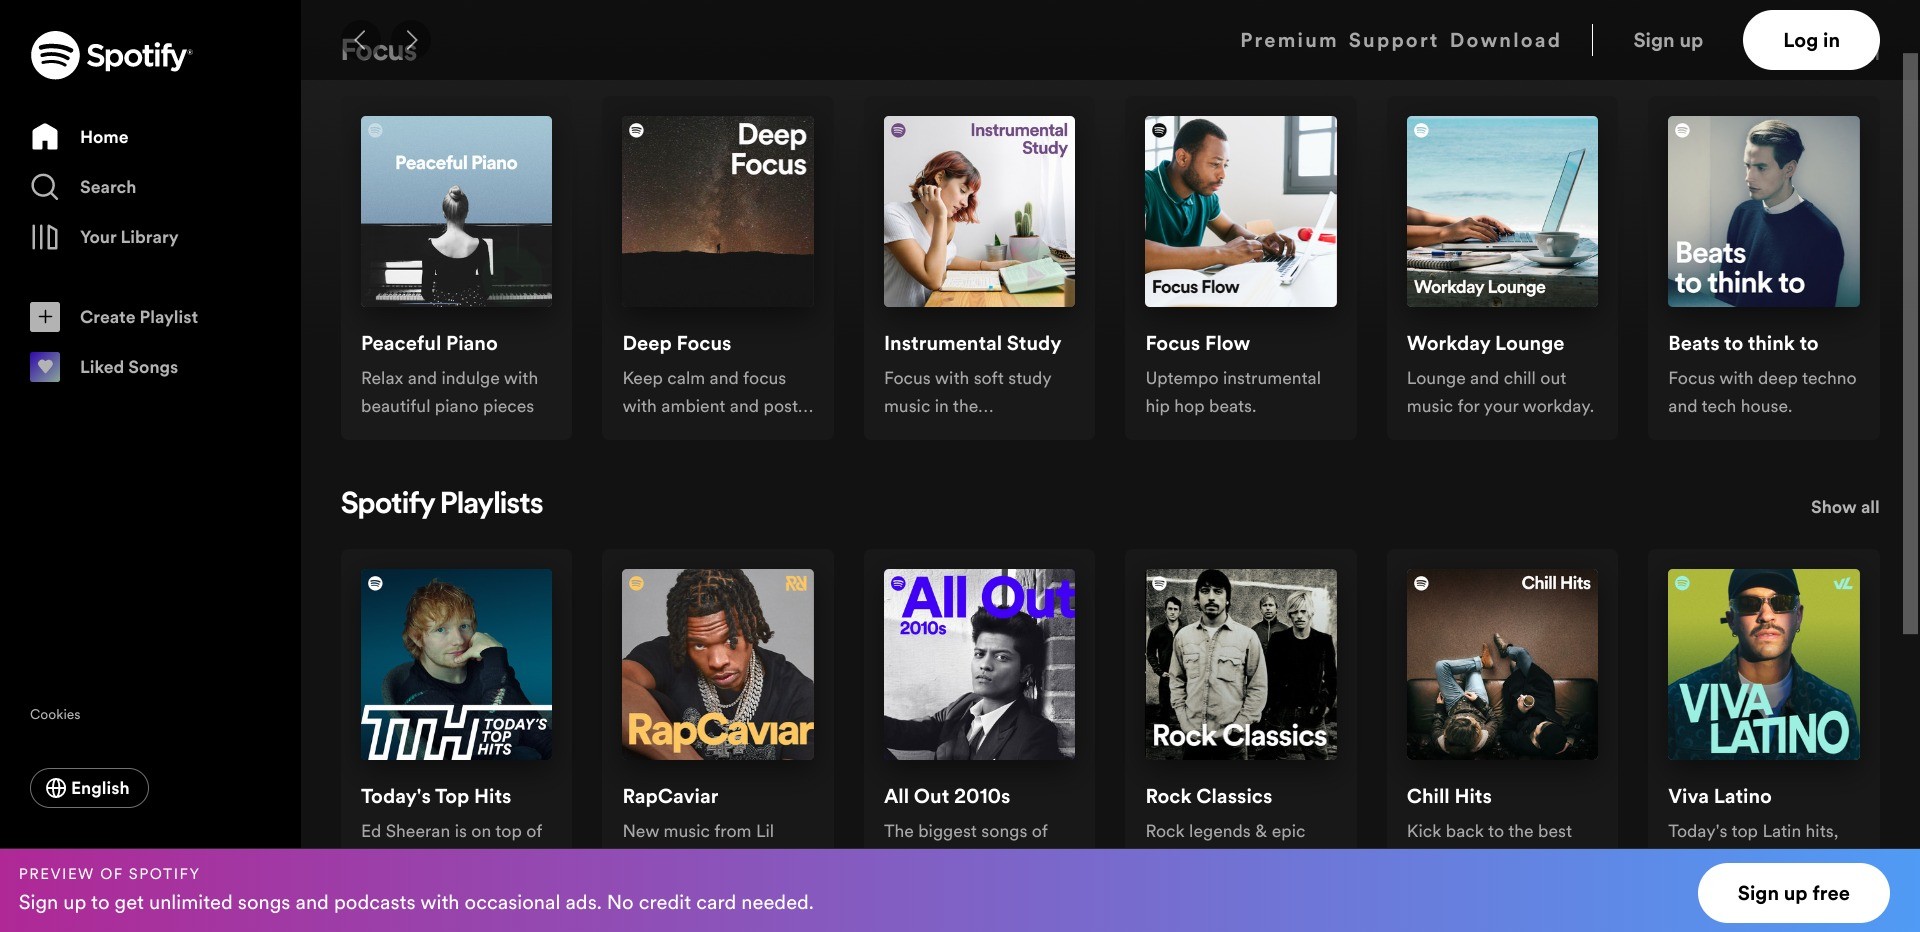 A screenshot of the homepage of spotify.com